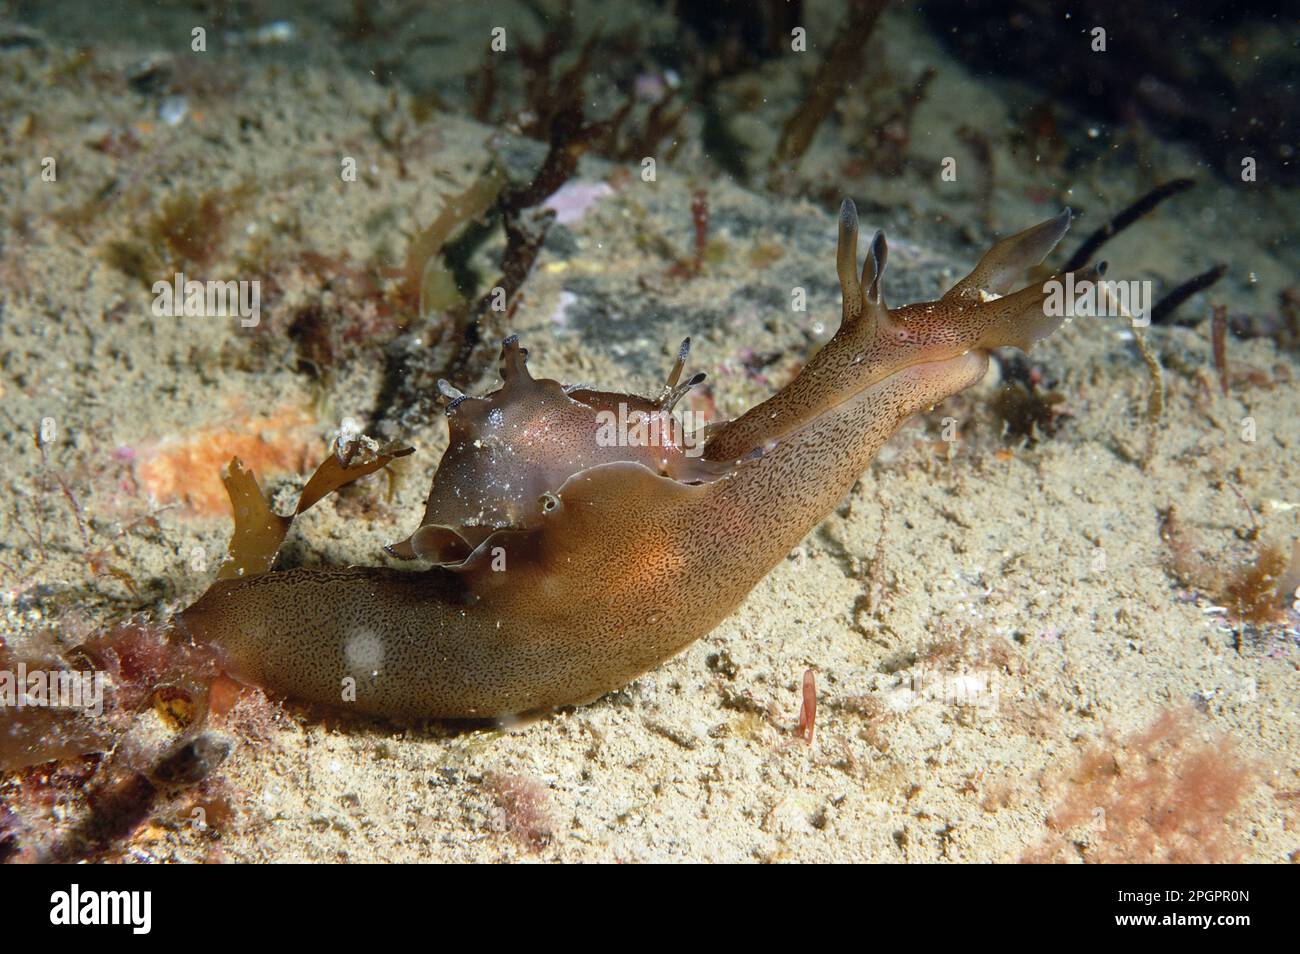 Spotted sea-hare, Spotted sea-hares, Other animals, Sea snails, Snails, Animals, Molluscs, Sea-hare (Aplysia punctata) adult, on seabed, Brandy Bay Stock Photo